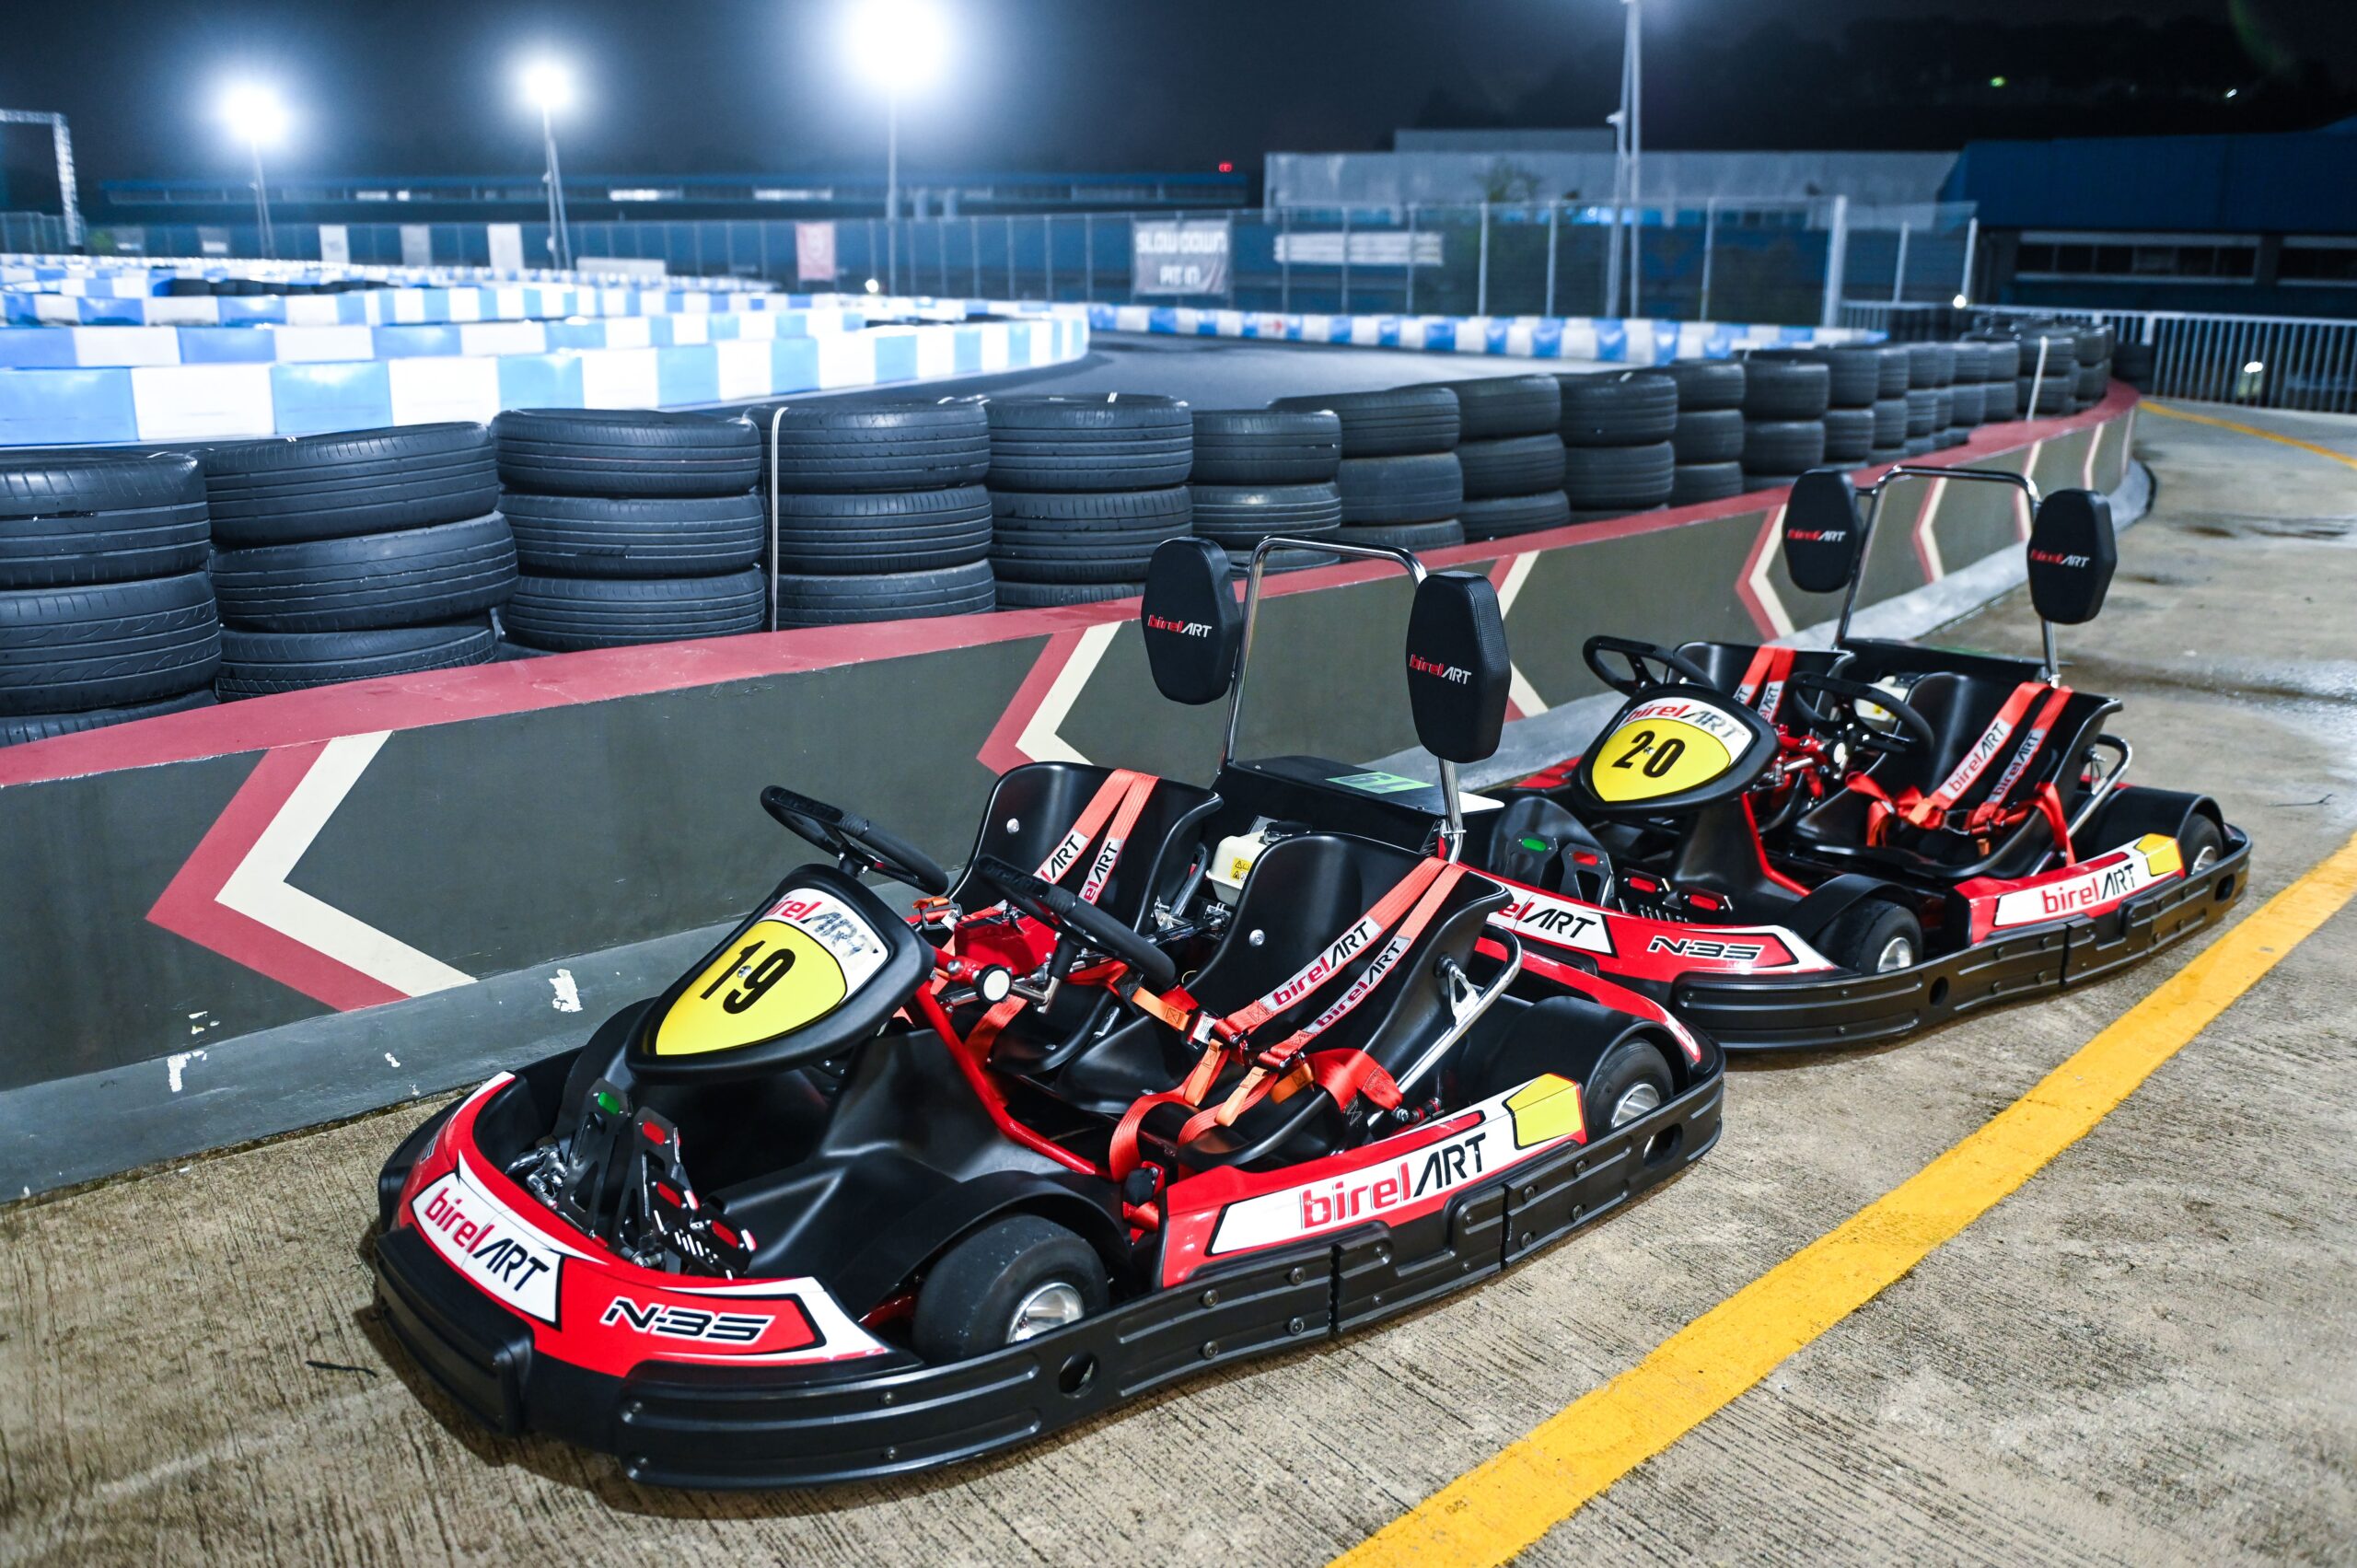 the karting arena jurong - double seater